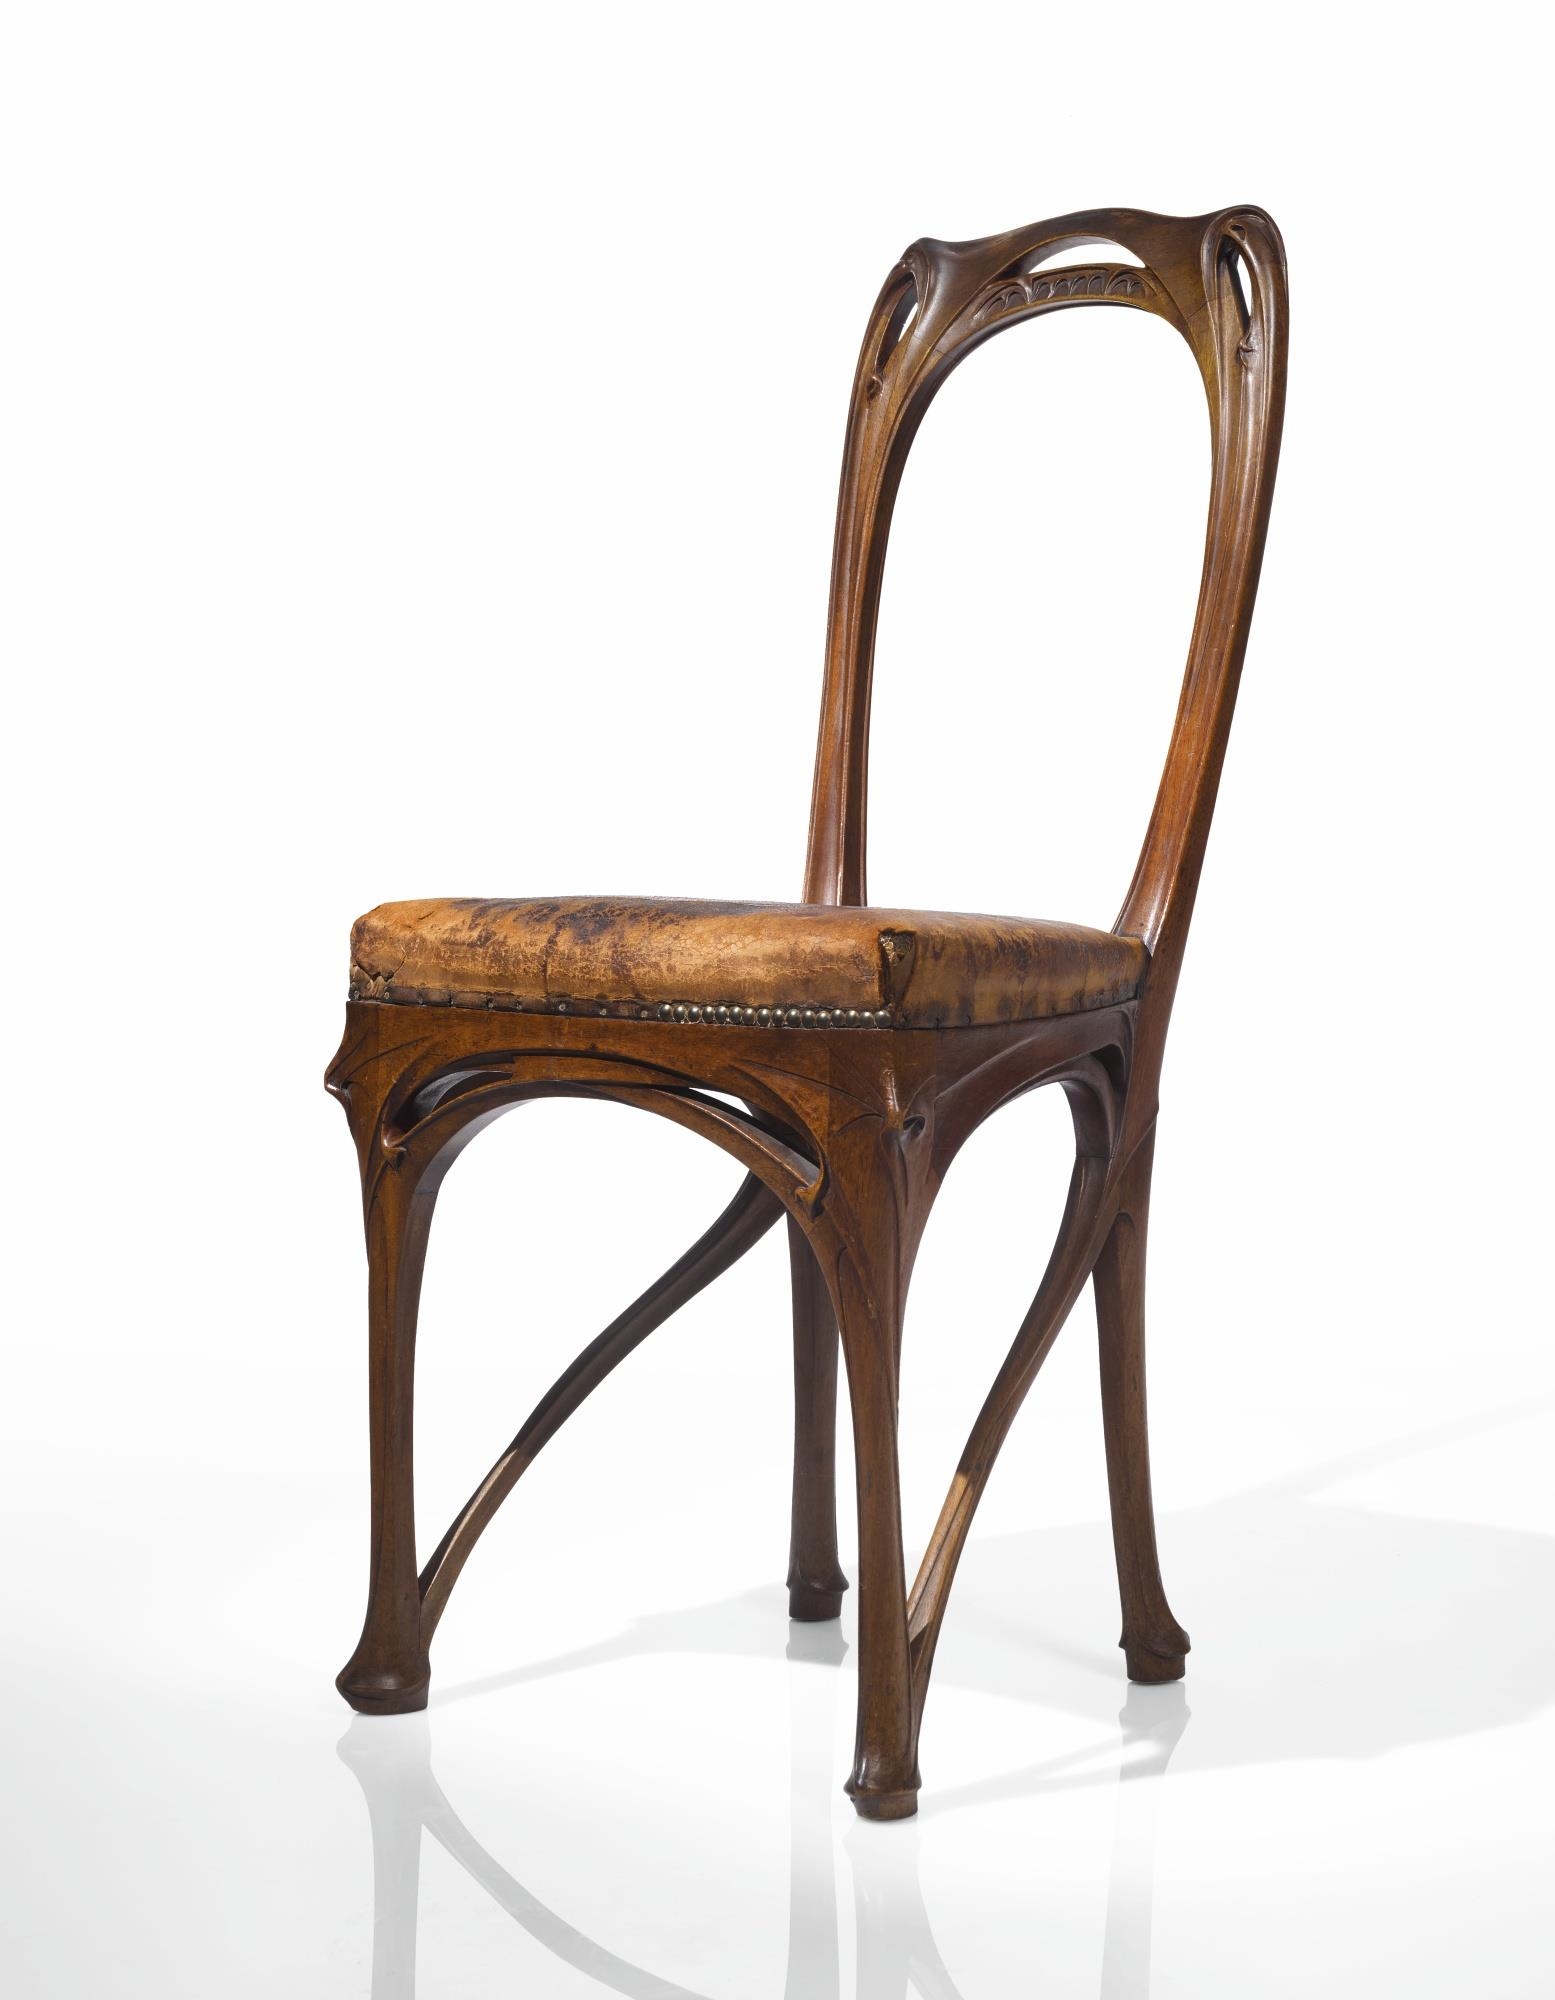 SIDE CHAIR by Hector Guimard, circa 1898